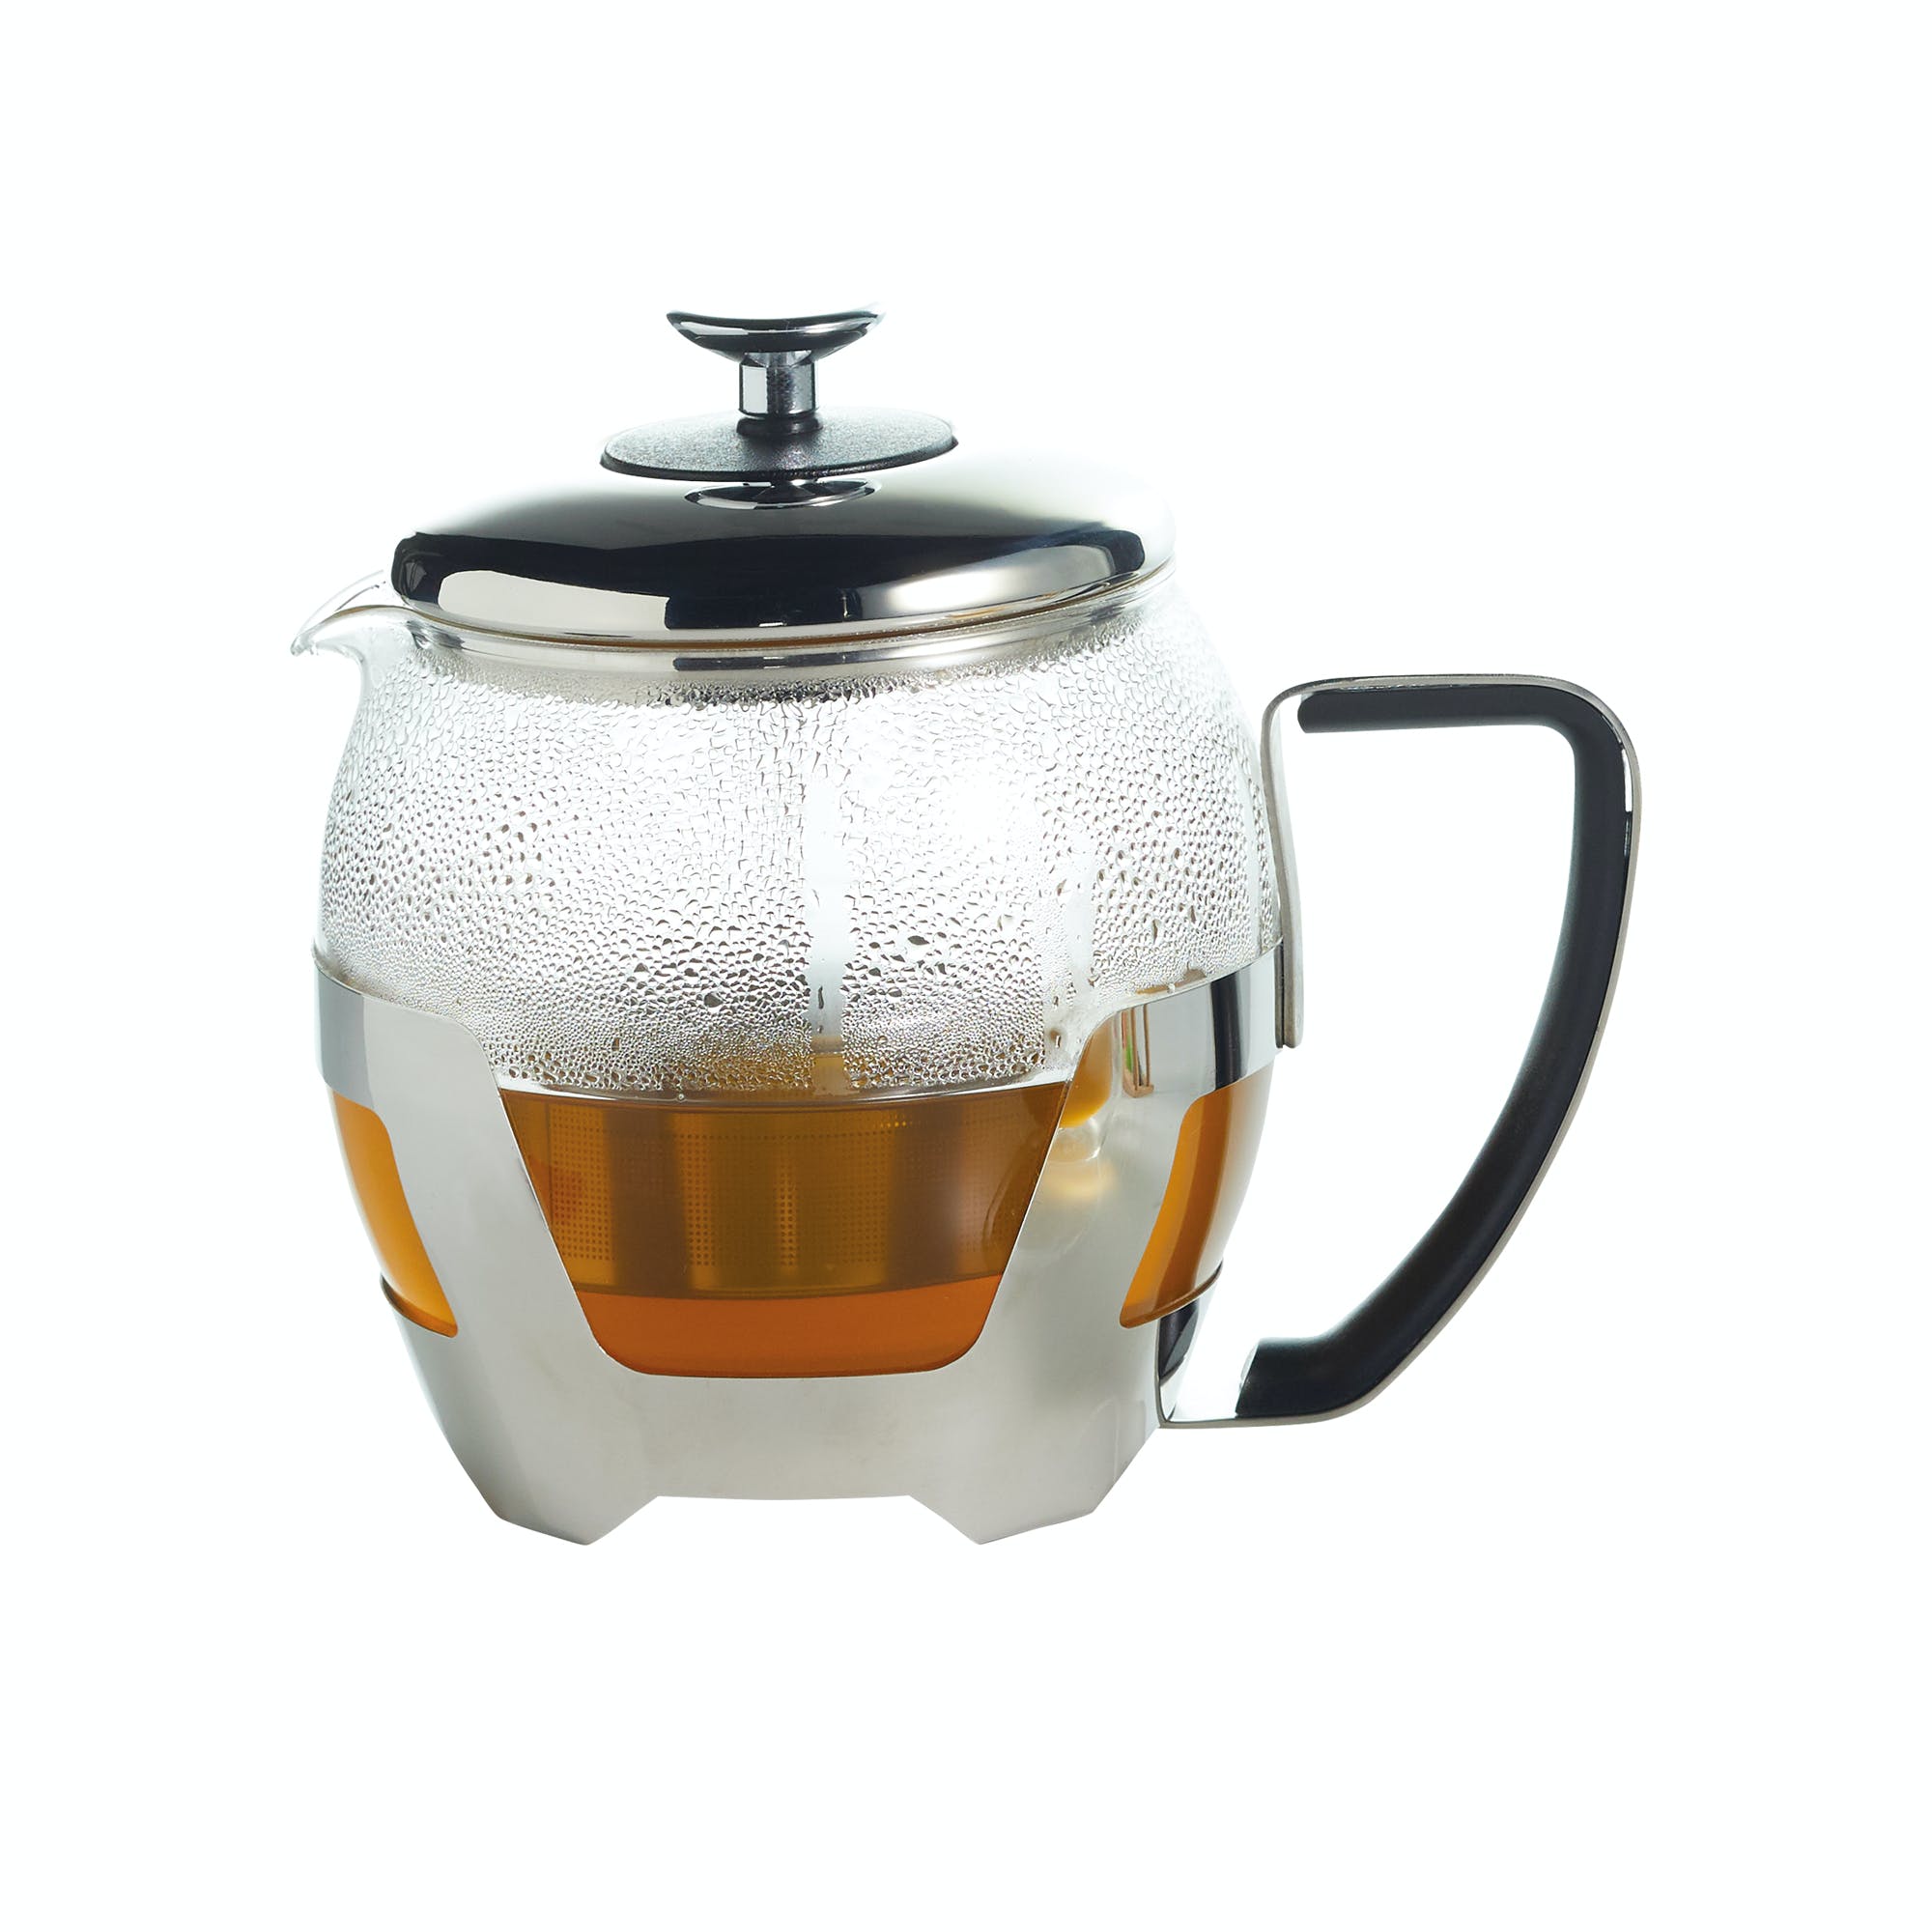 Le’Xpress 1 Litre Stainless Steel & Glass Teapot with Infuser Press - Kate's Cupboard